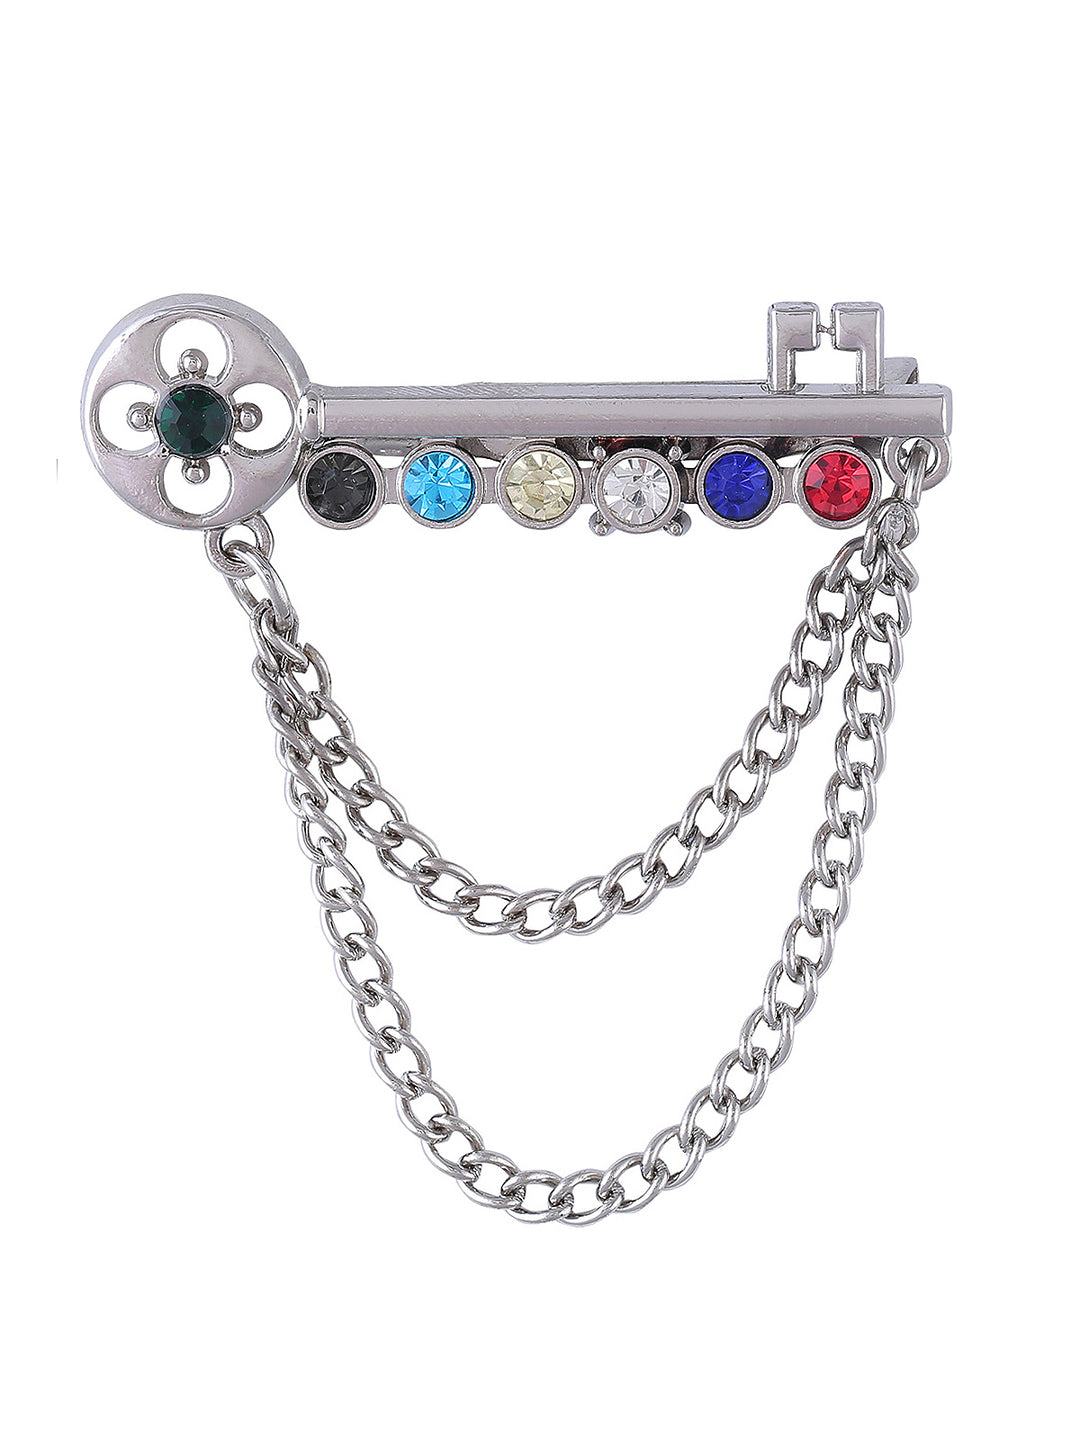 Key Shaped Multicoloured Brooch with Chain Hanging in Silver Color